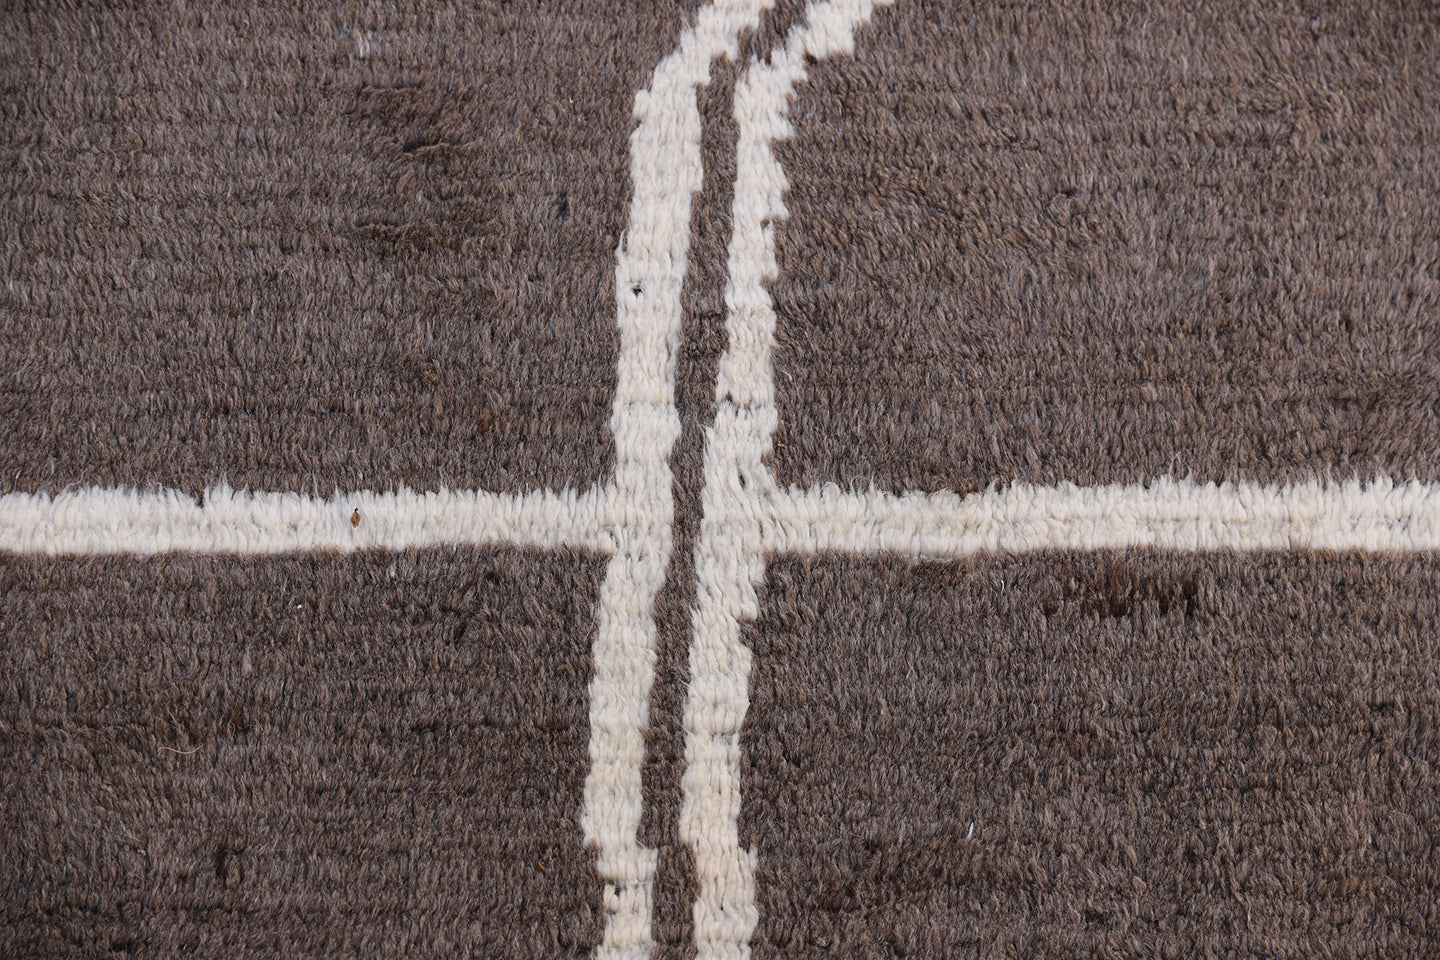 12'x16' Large Brown and White Geometric Ariana Barchi Area Rug